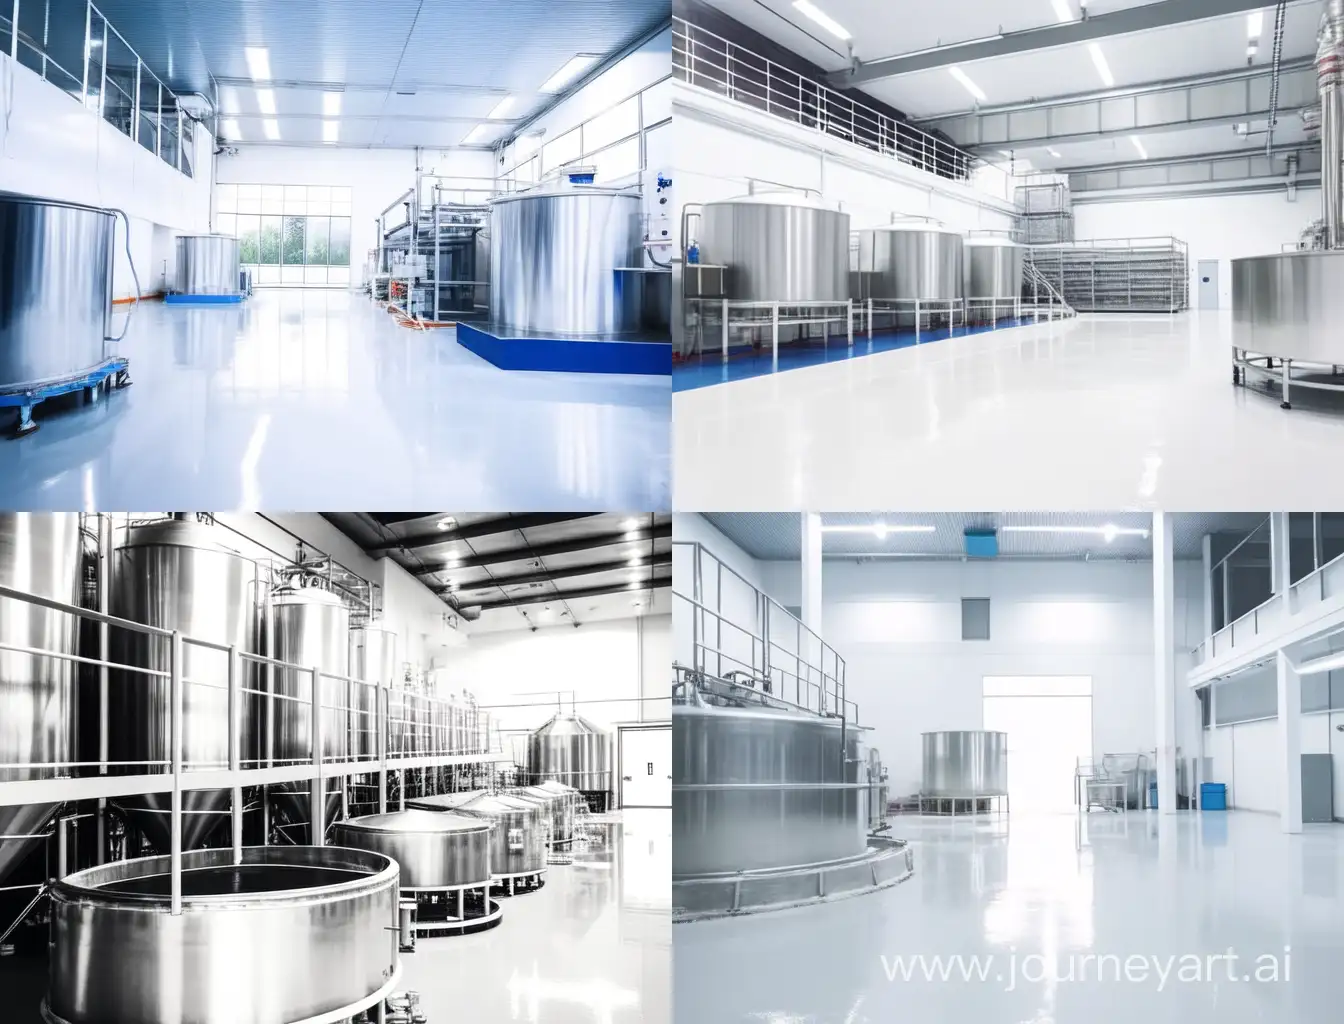 Metalworking Centre Manufacture of stainless steel products. Large metal tanks, a large metal container with a valve. Light shop with white walls and a dark concrete floor covered with liquid glass products.